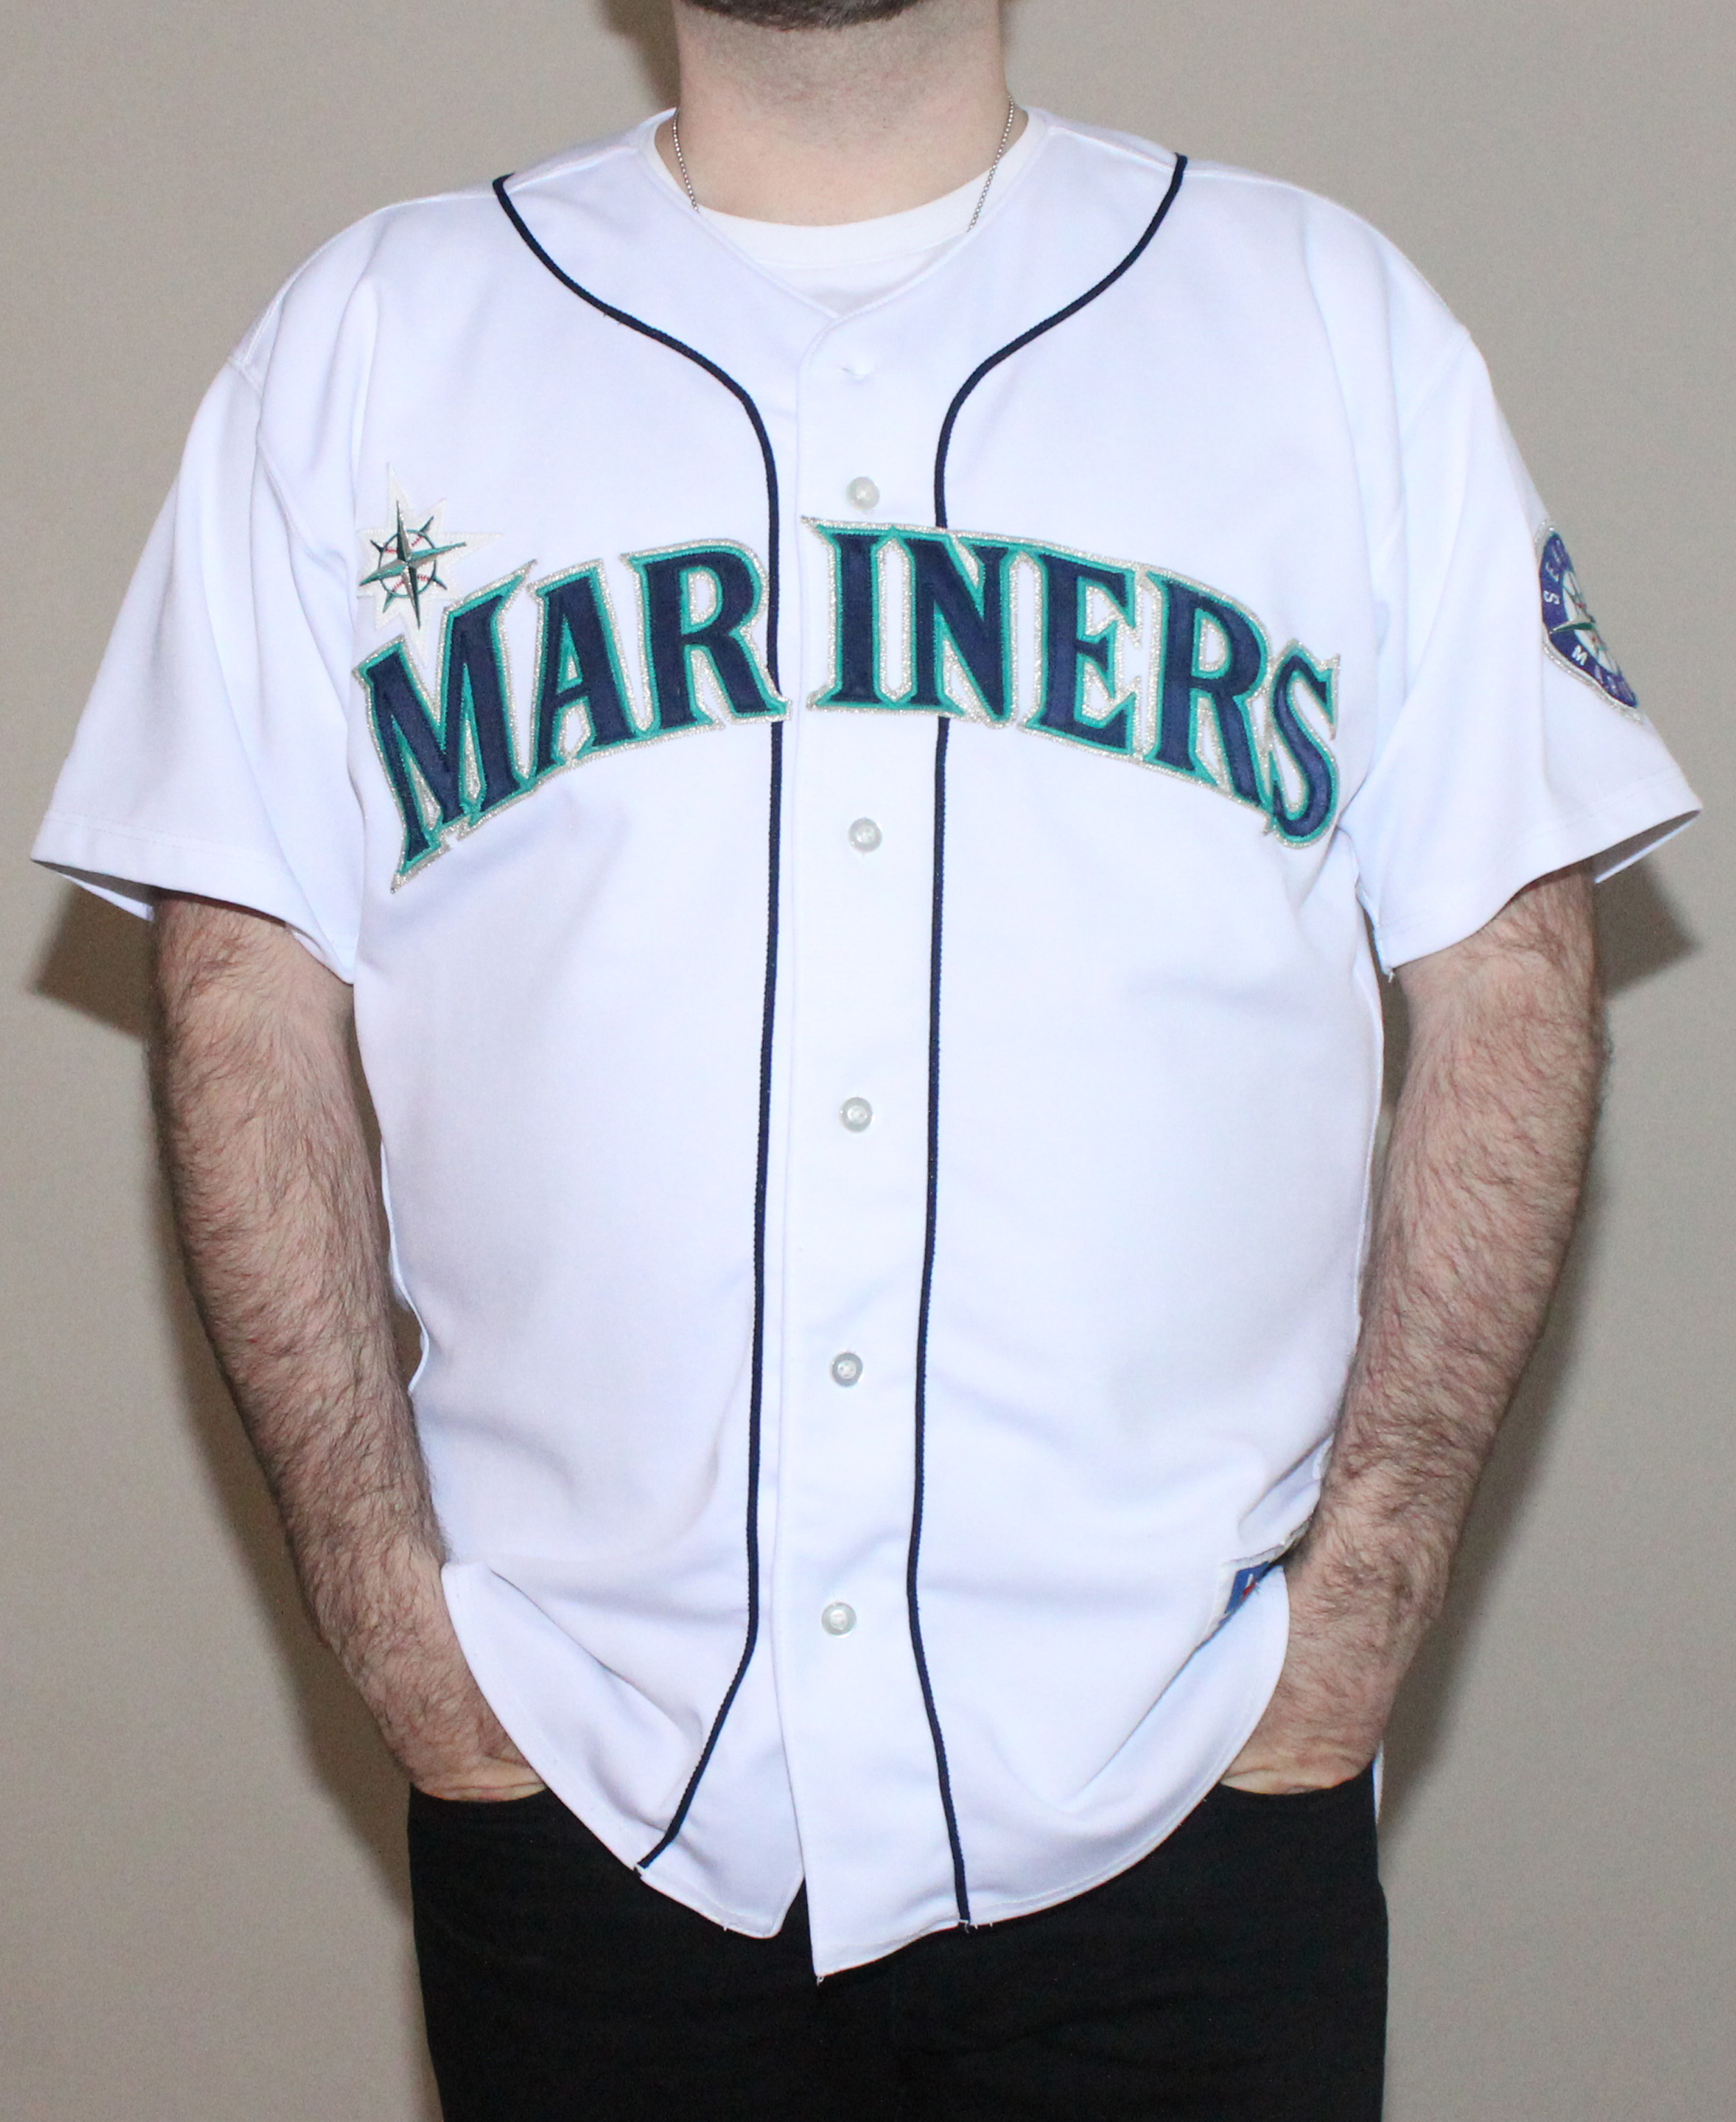 authentic mariners jersey